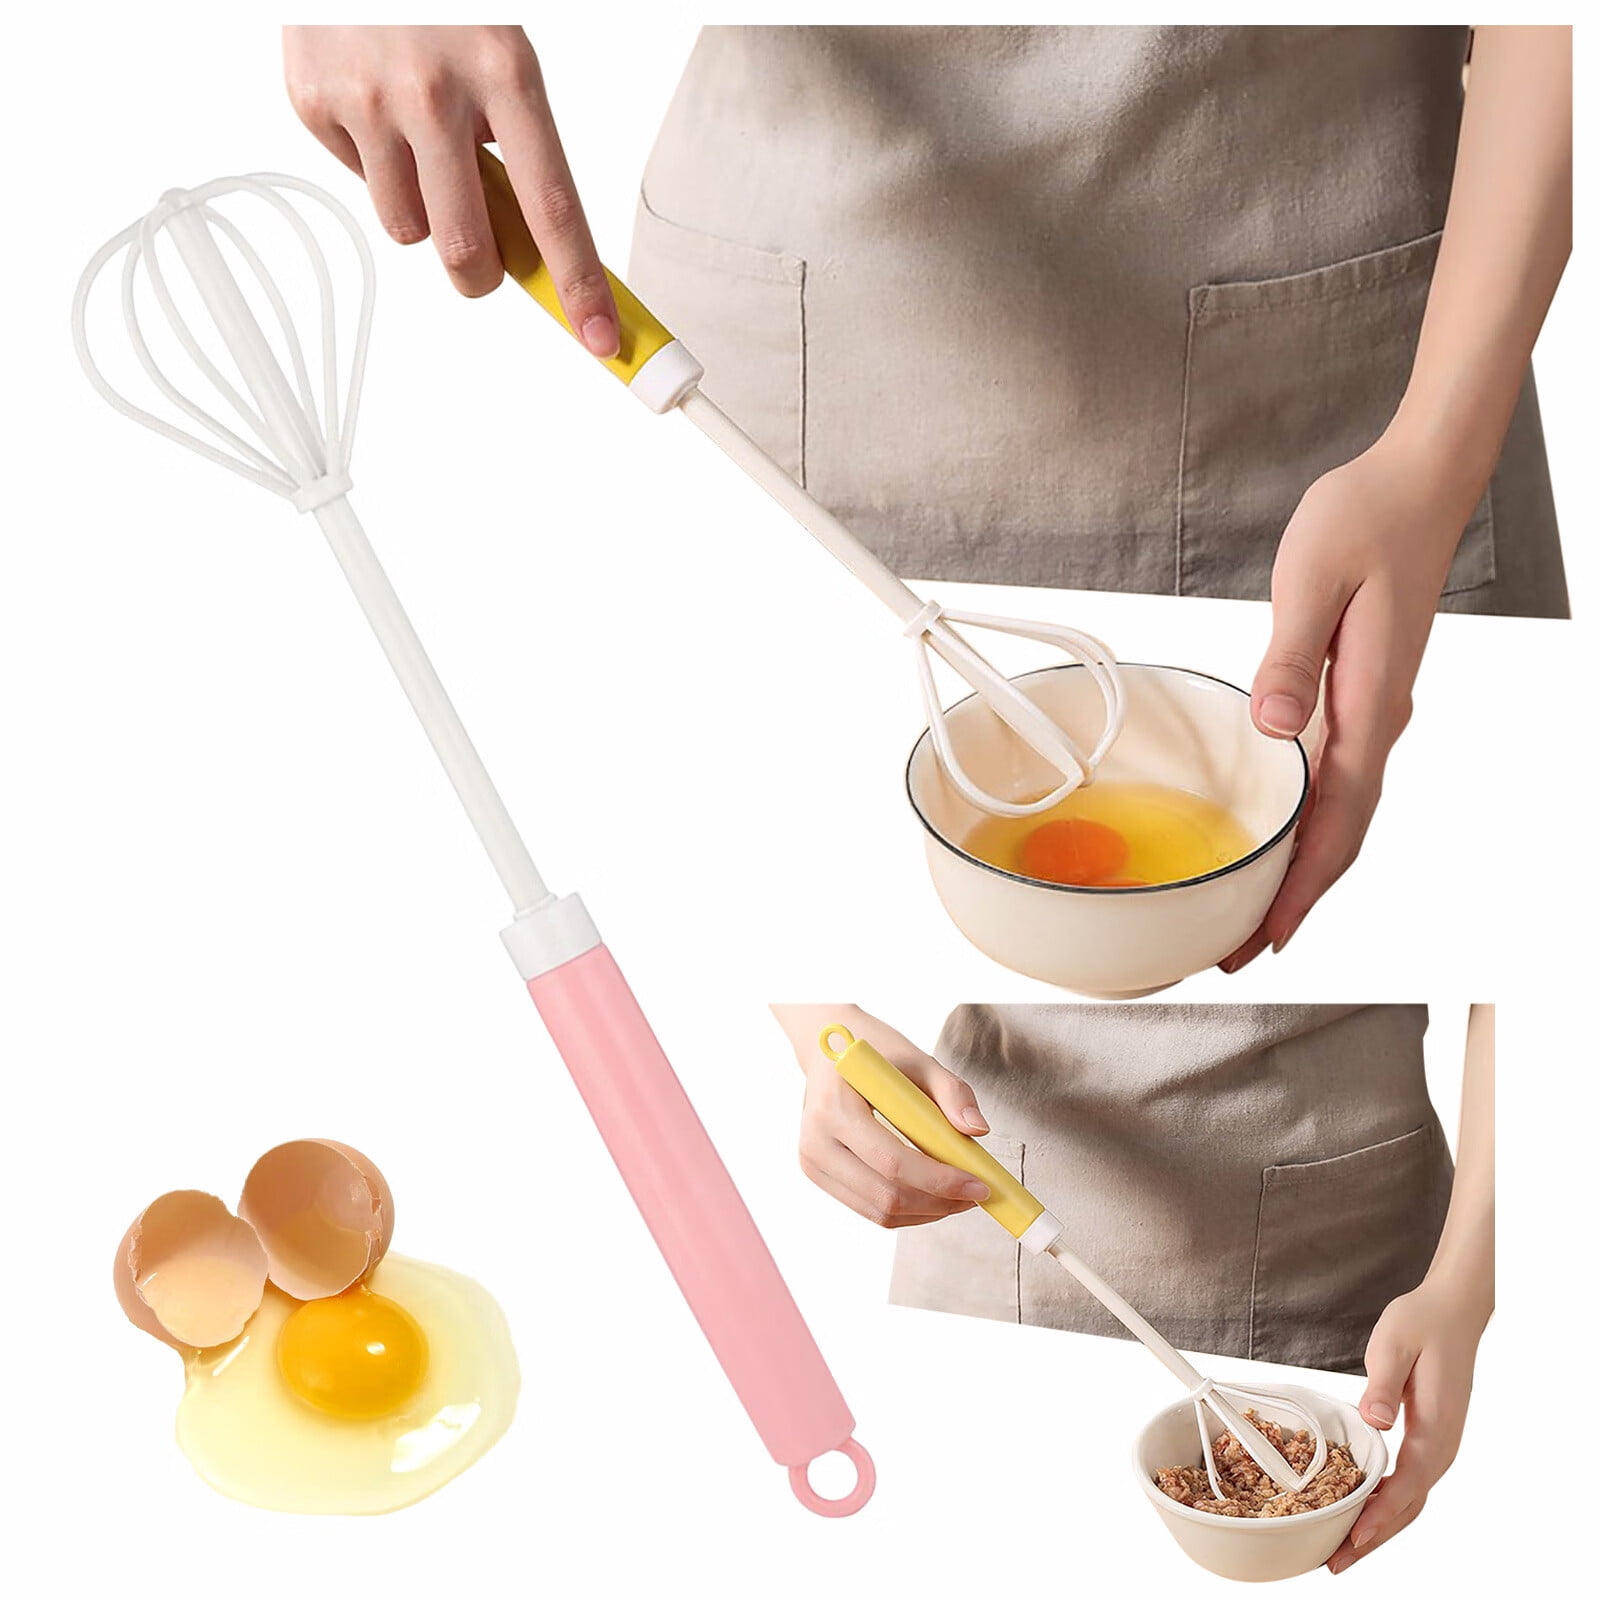 Farberware Soft Grips Stainless Steel Pastry Blender with Blades